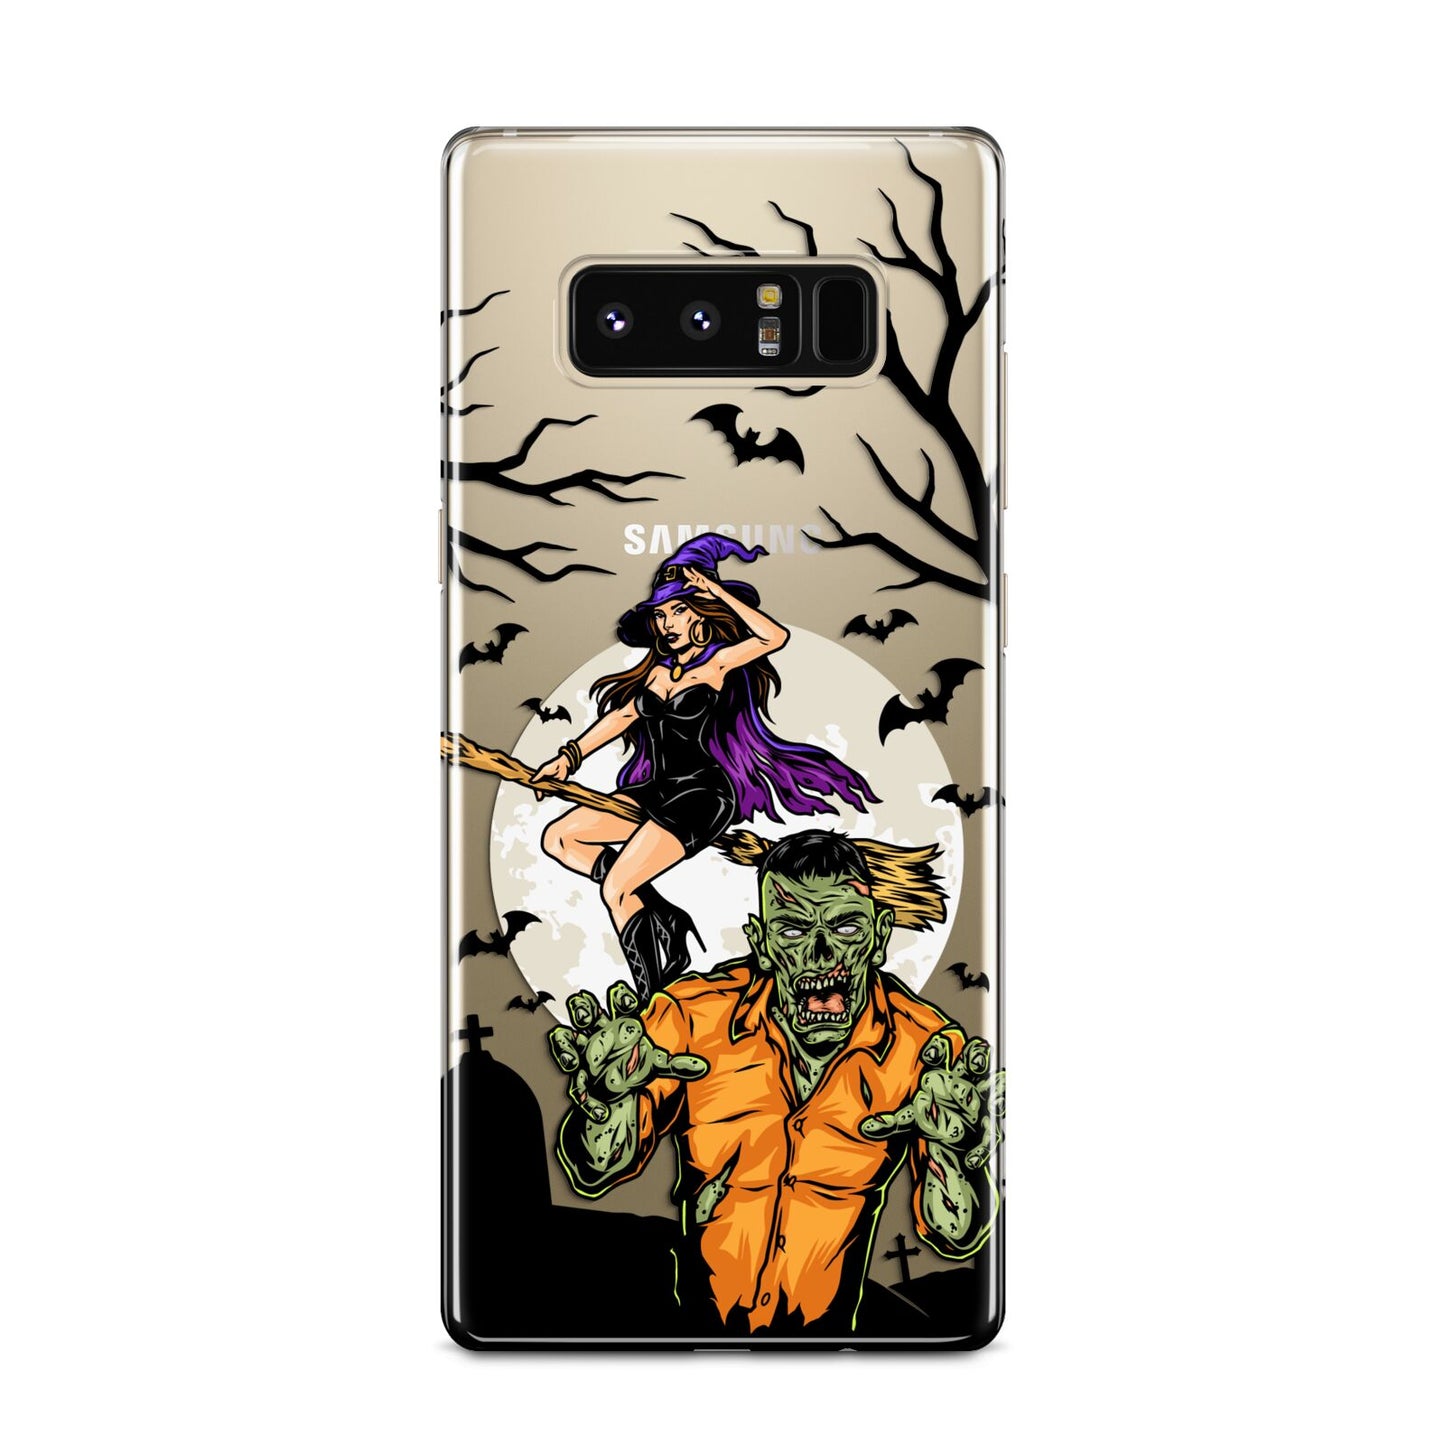 Witch Meets Zombie Samsung Galaxy Note 8 Case